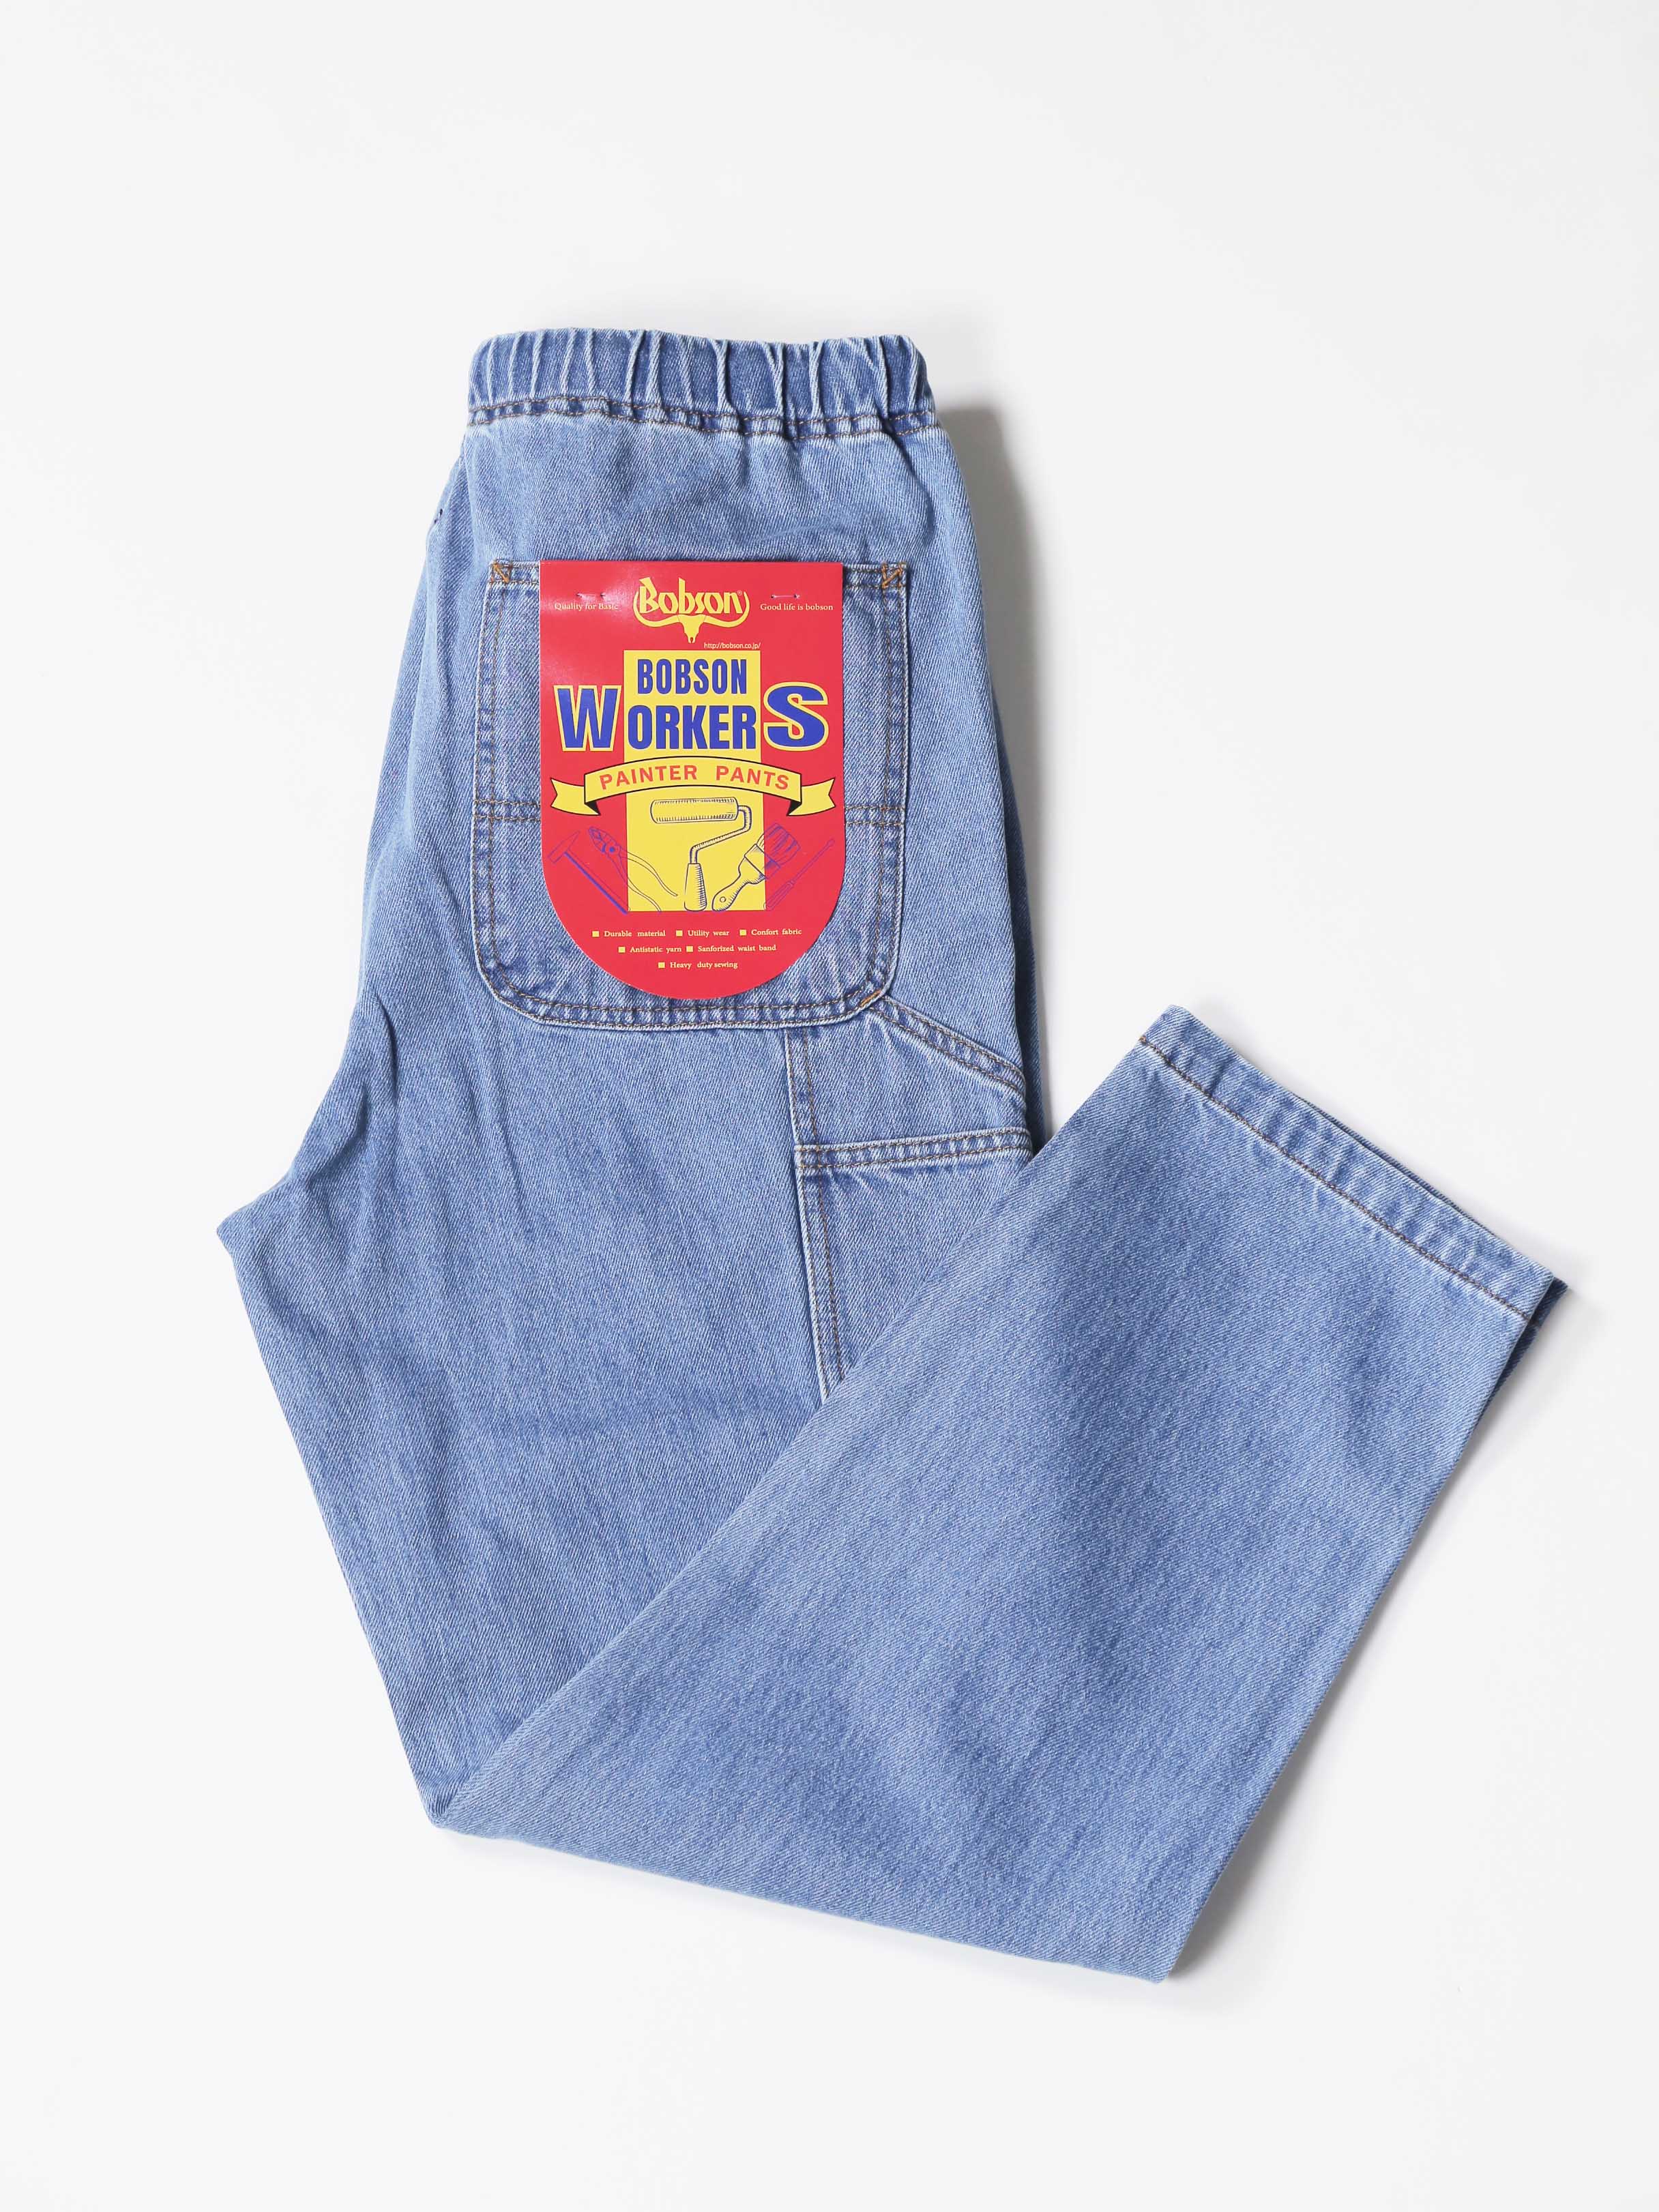 Utility Pants Denim Bleached Color Bobson Workers